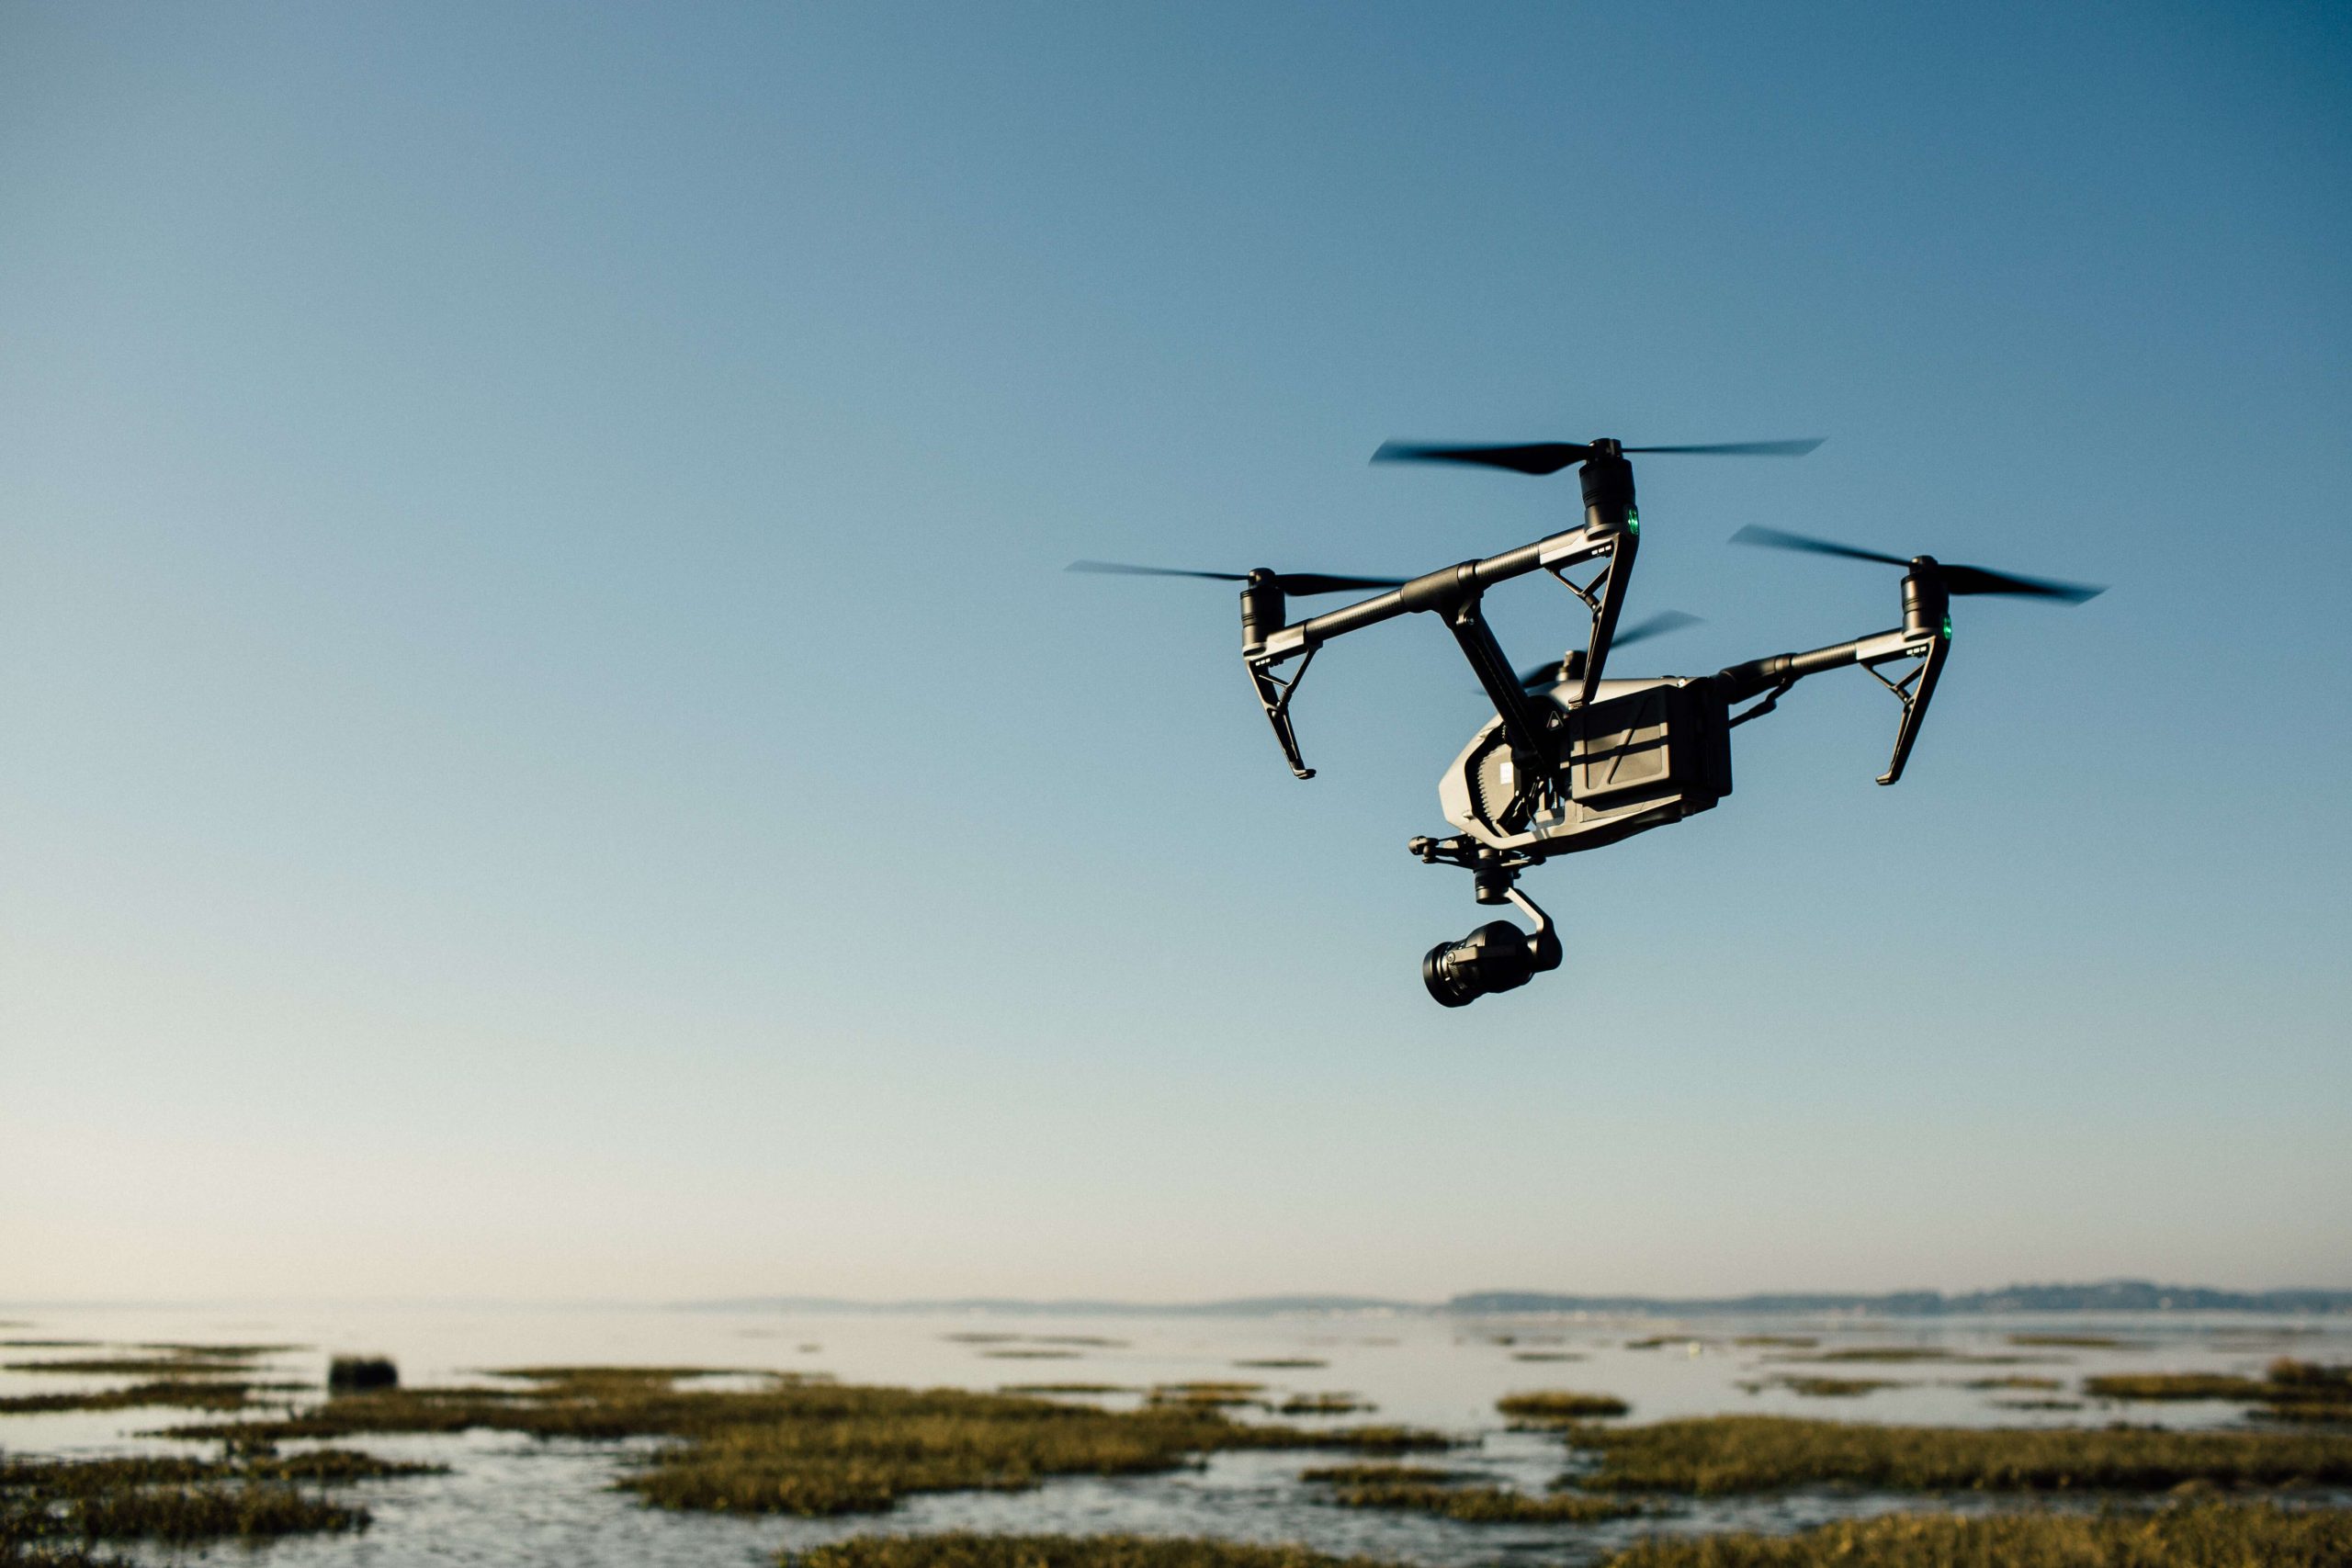 Which are the best professional drones in 2020